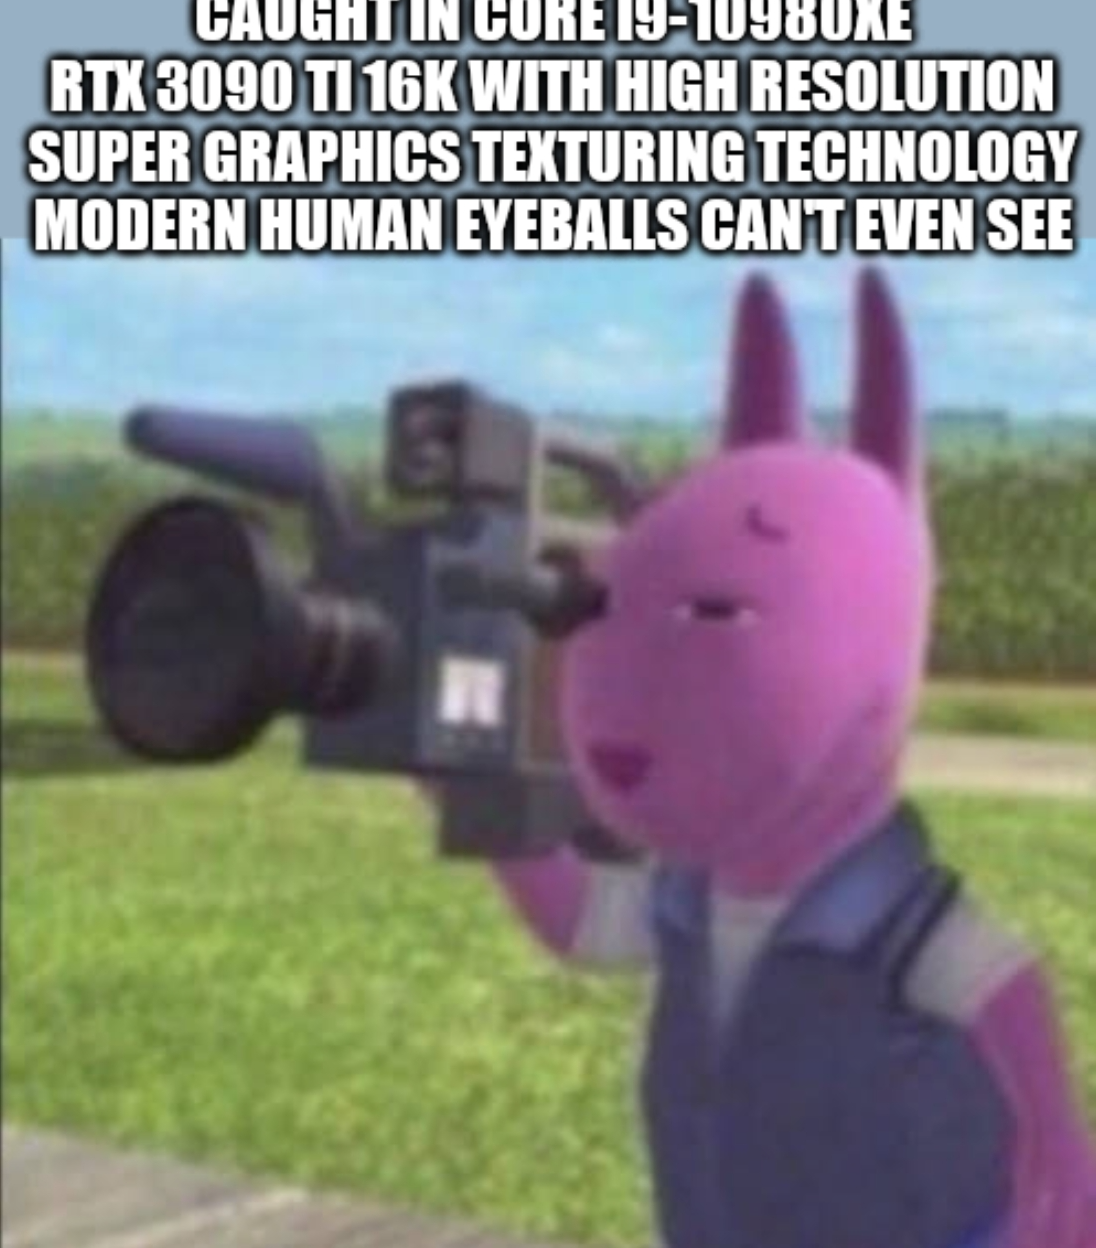 High Quality Caught in Core i9-10980XE RTX 3090 Ti Blank Meme Template